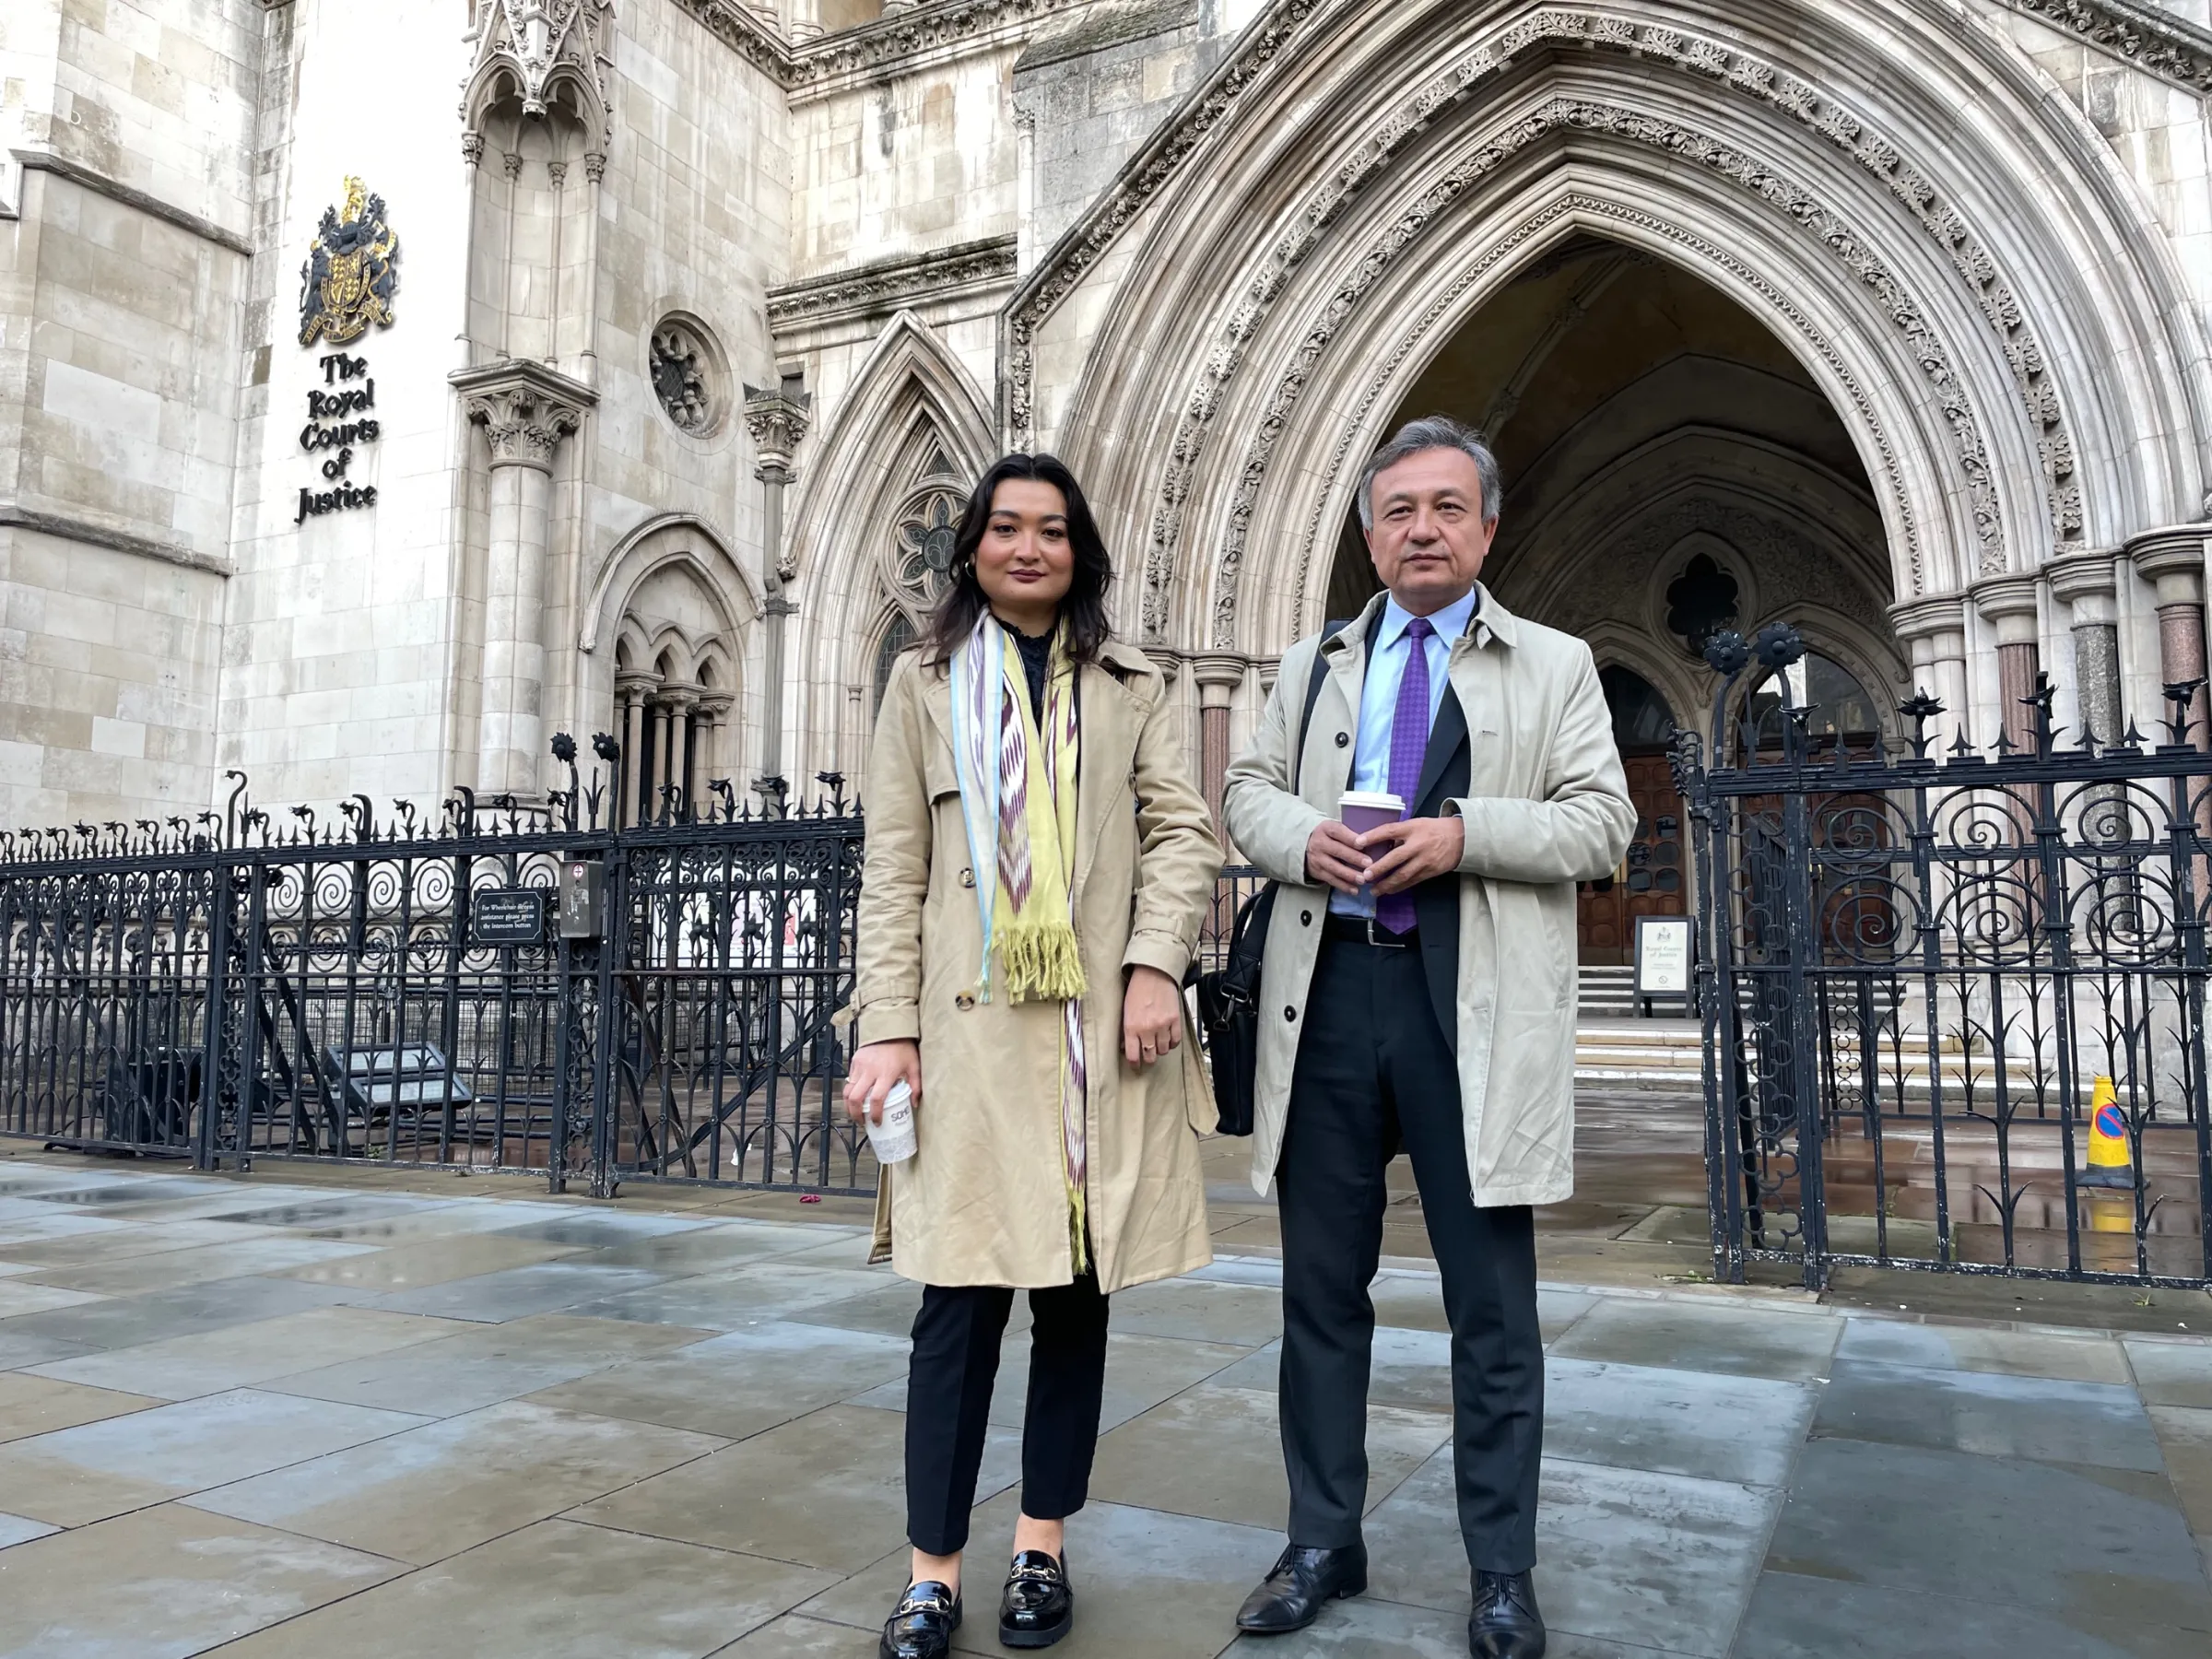 Uyghur activists Zumretay Arkin (L) and Dolkun Isa (R) from the World Uyghur Congress pose for a photo outside the High Court, Royal Courts of Justice on 25 October 2022, in London, Britain. THOMSON REUTERS FOUNDATION / Lin Taylor